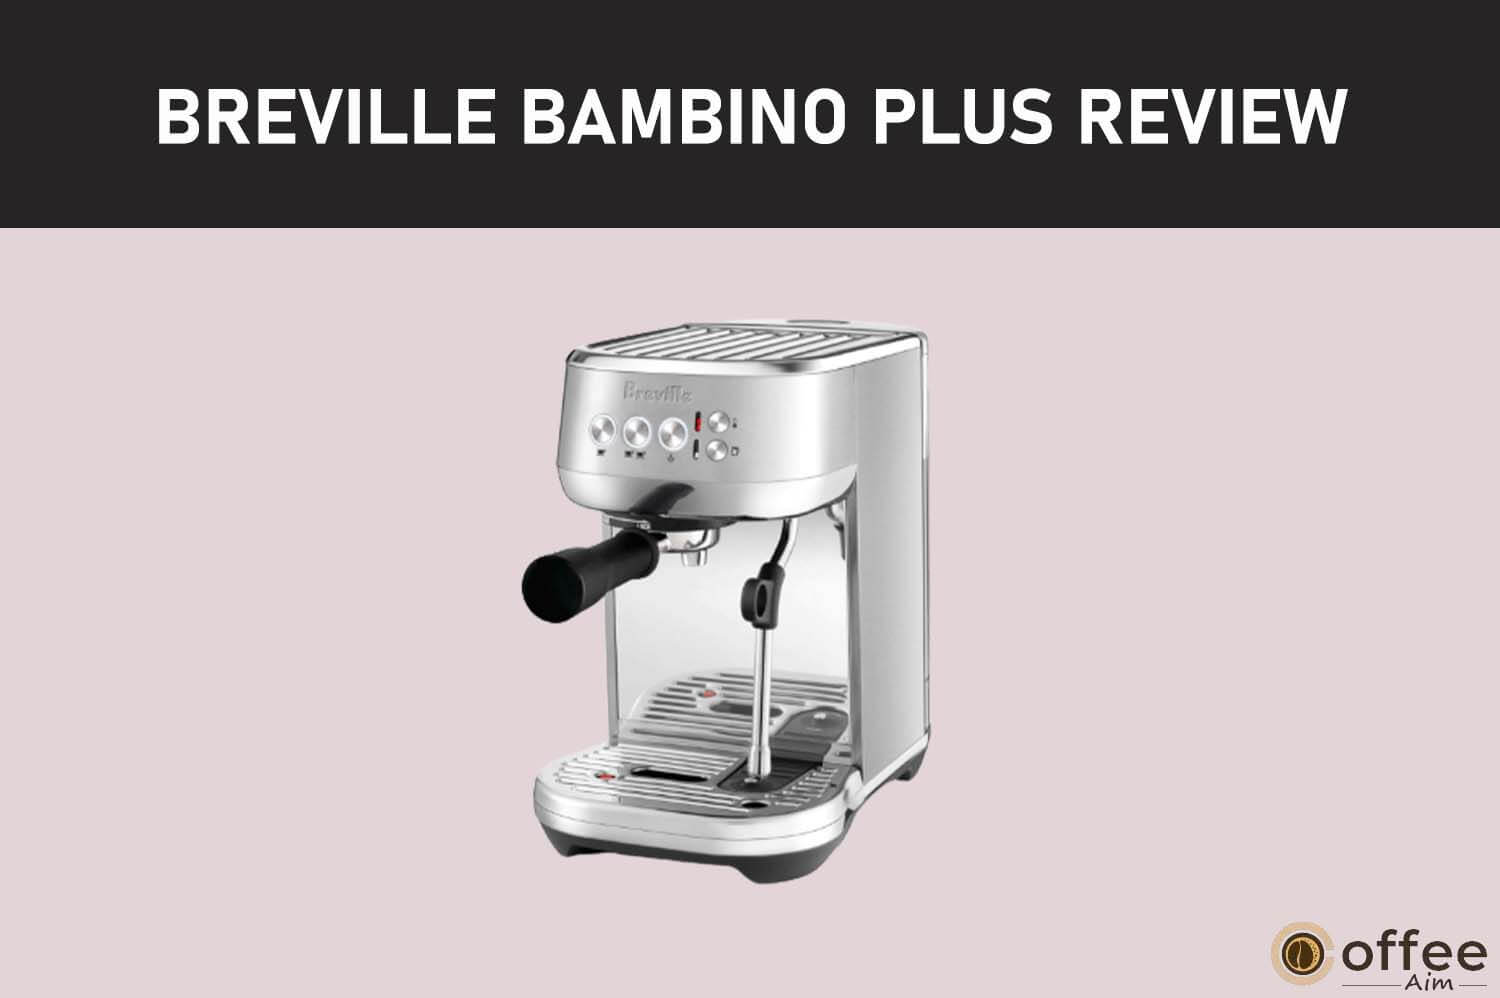 featured image for the article "Breville Bambino Plus Review"